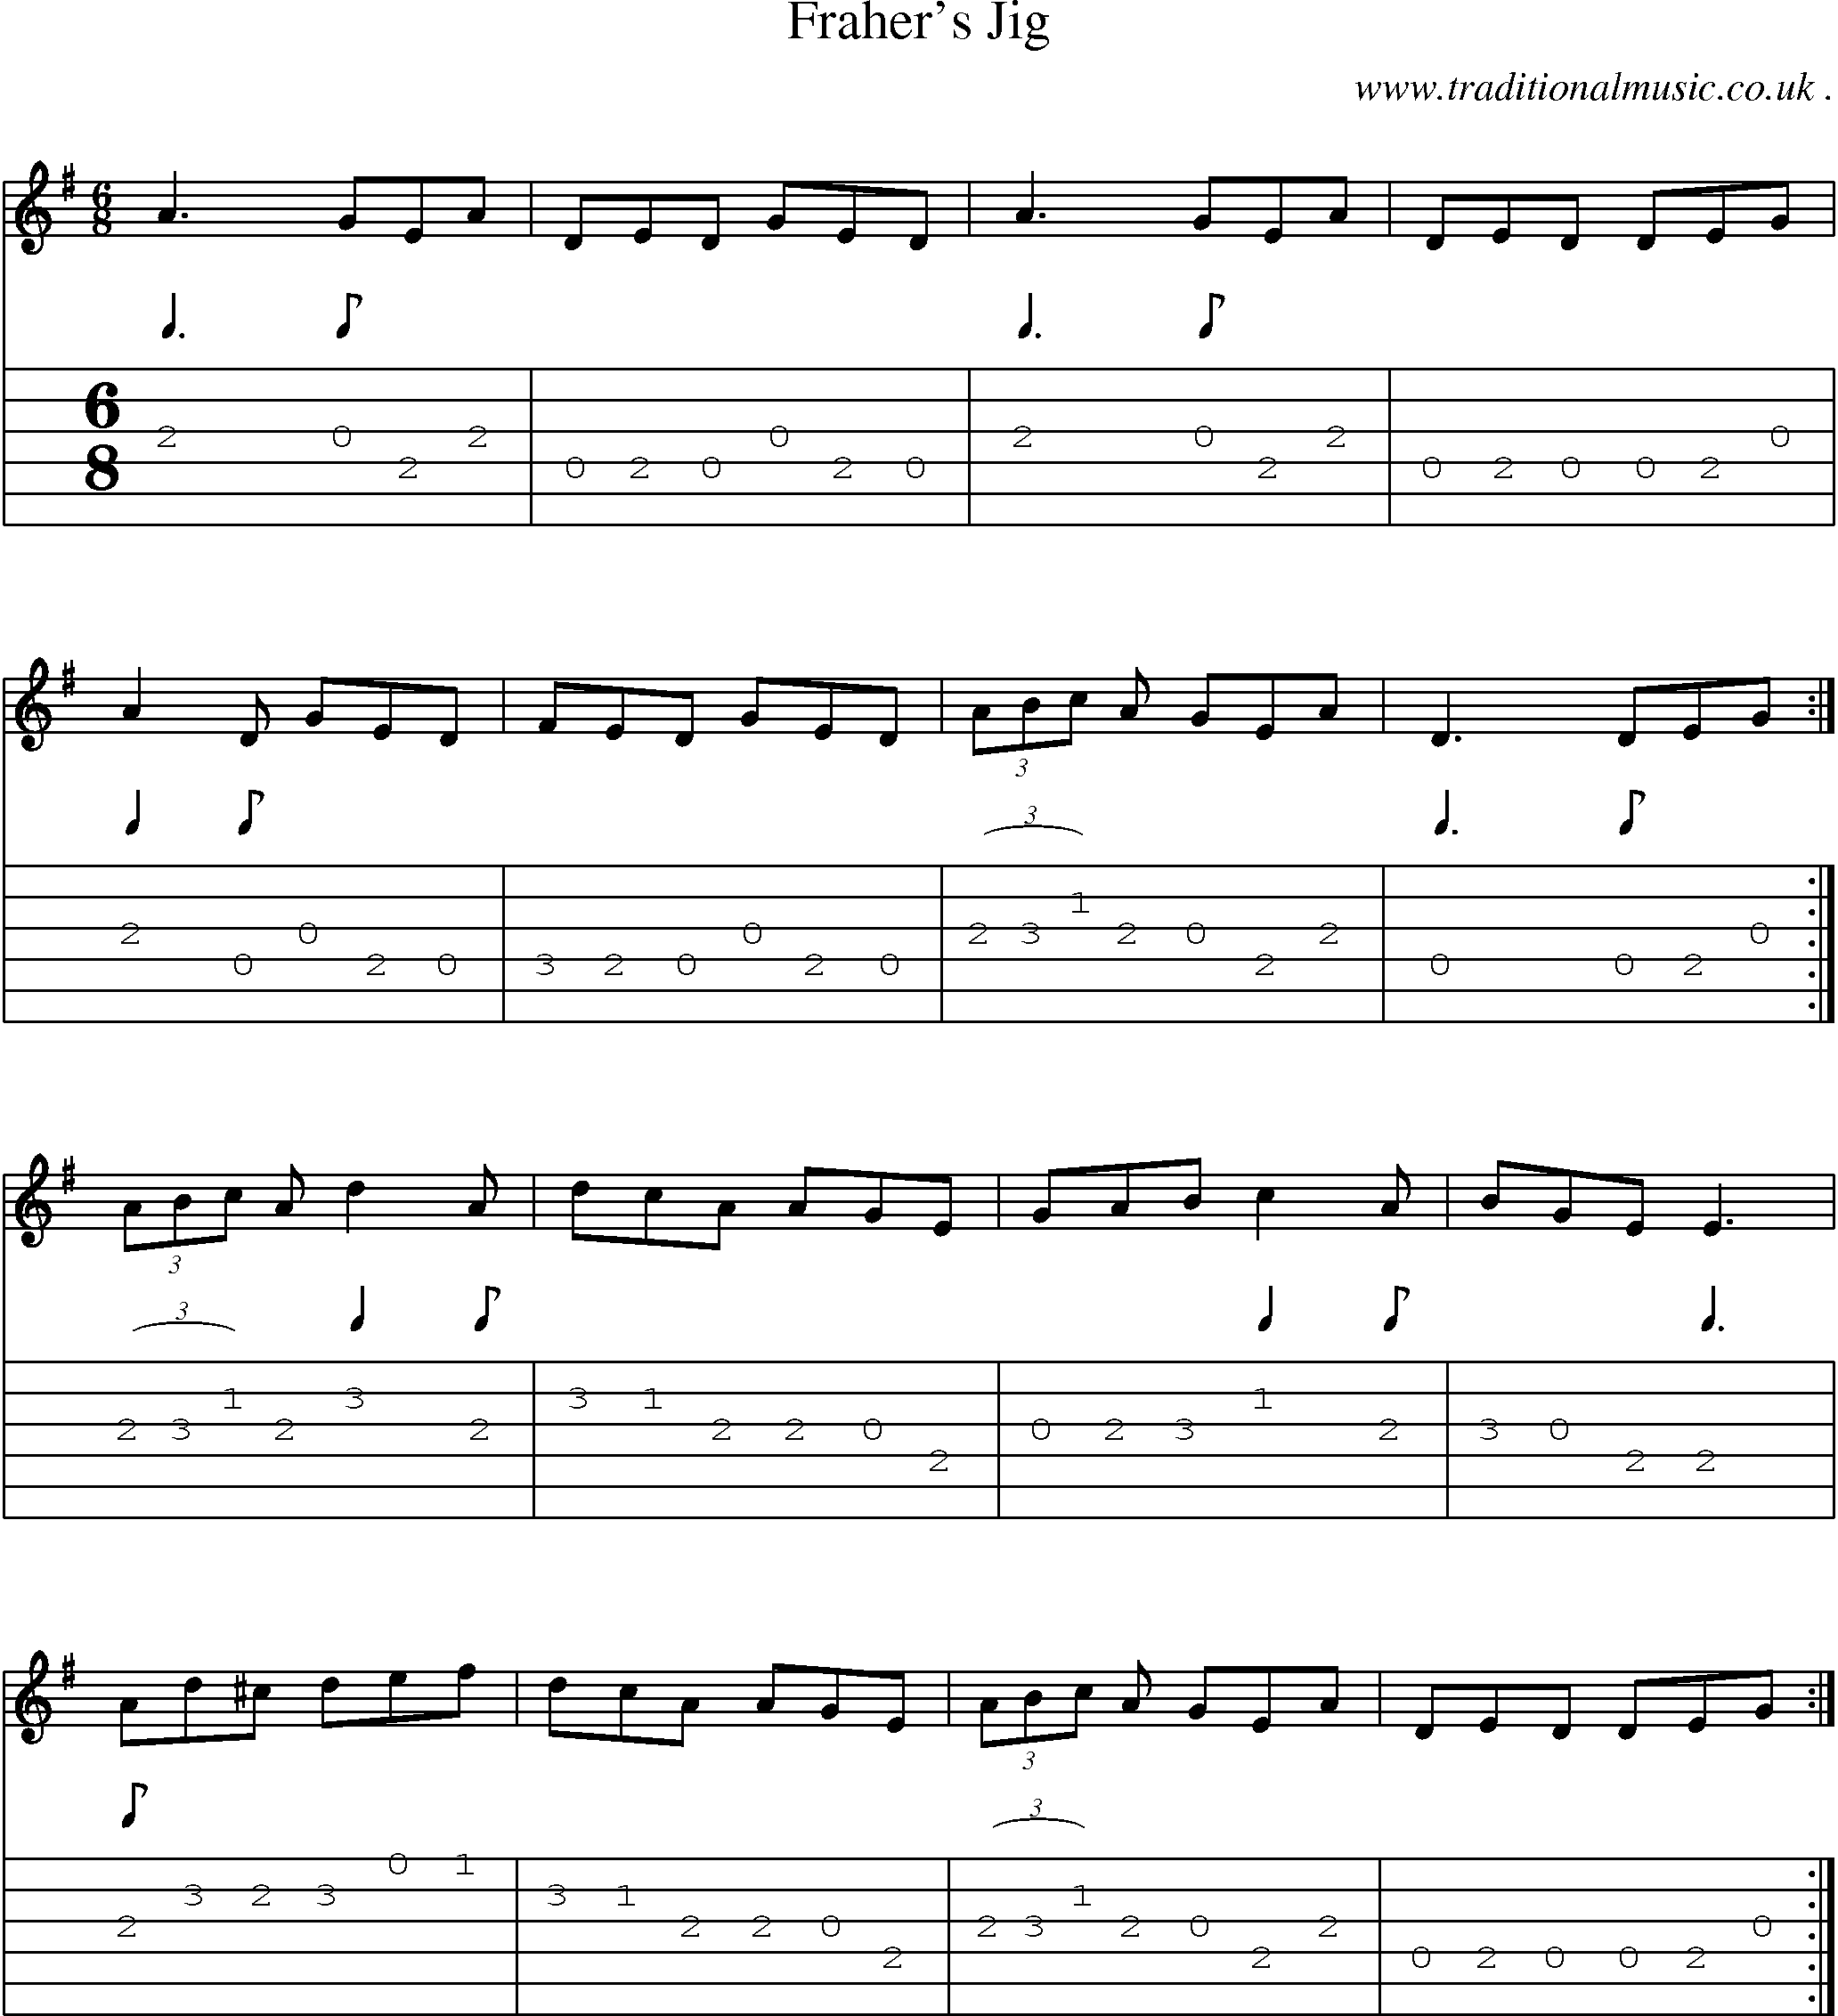 Sheet-Music and Guitar Tabs for Frahers Jig